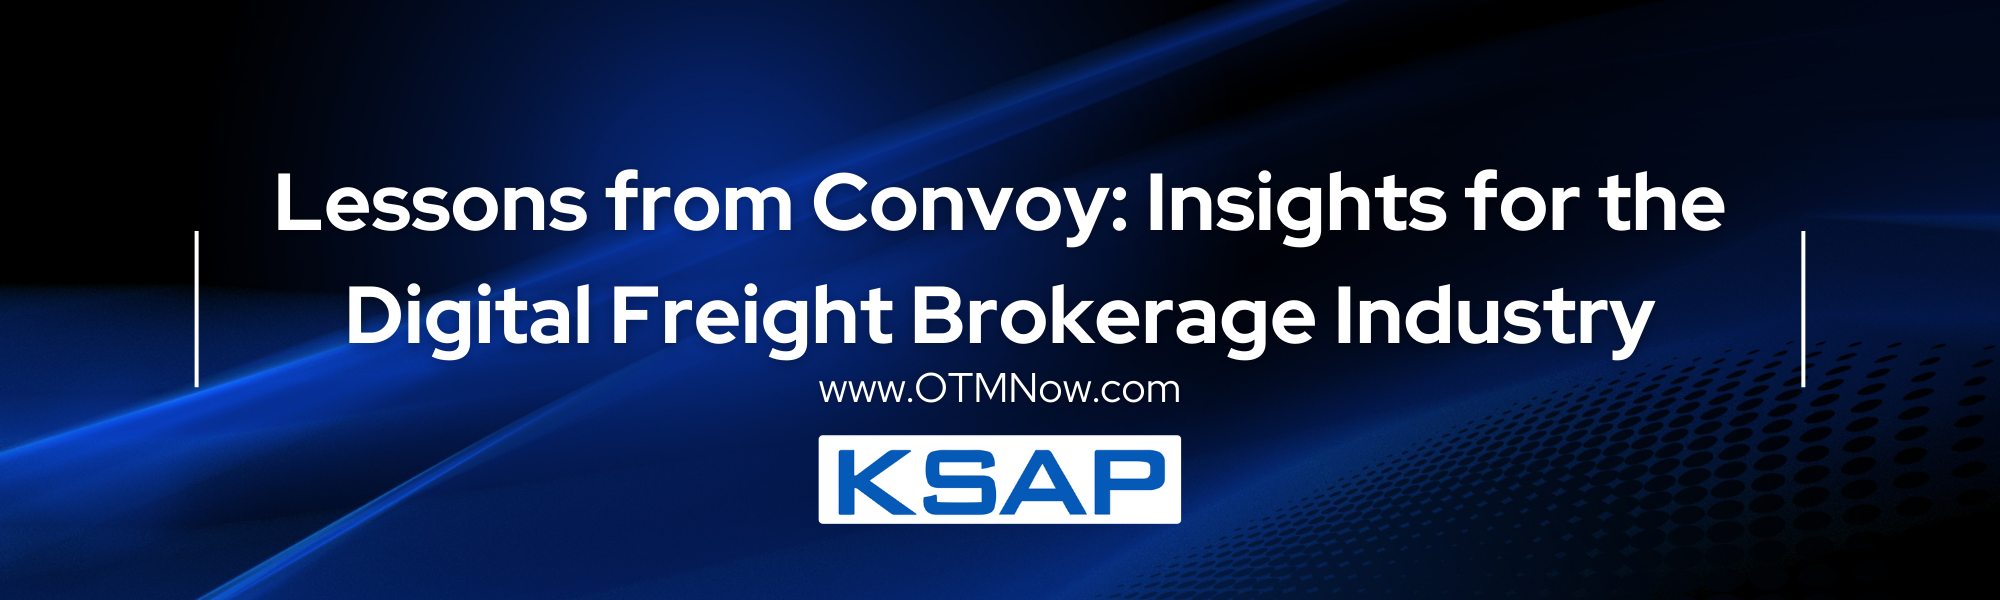 Lessons from Convoy: Insights for the Digital Freight Brokerage Industry